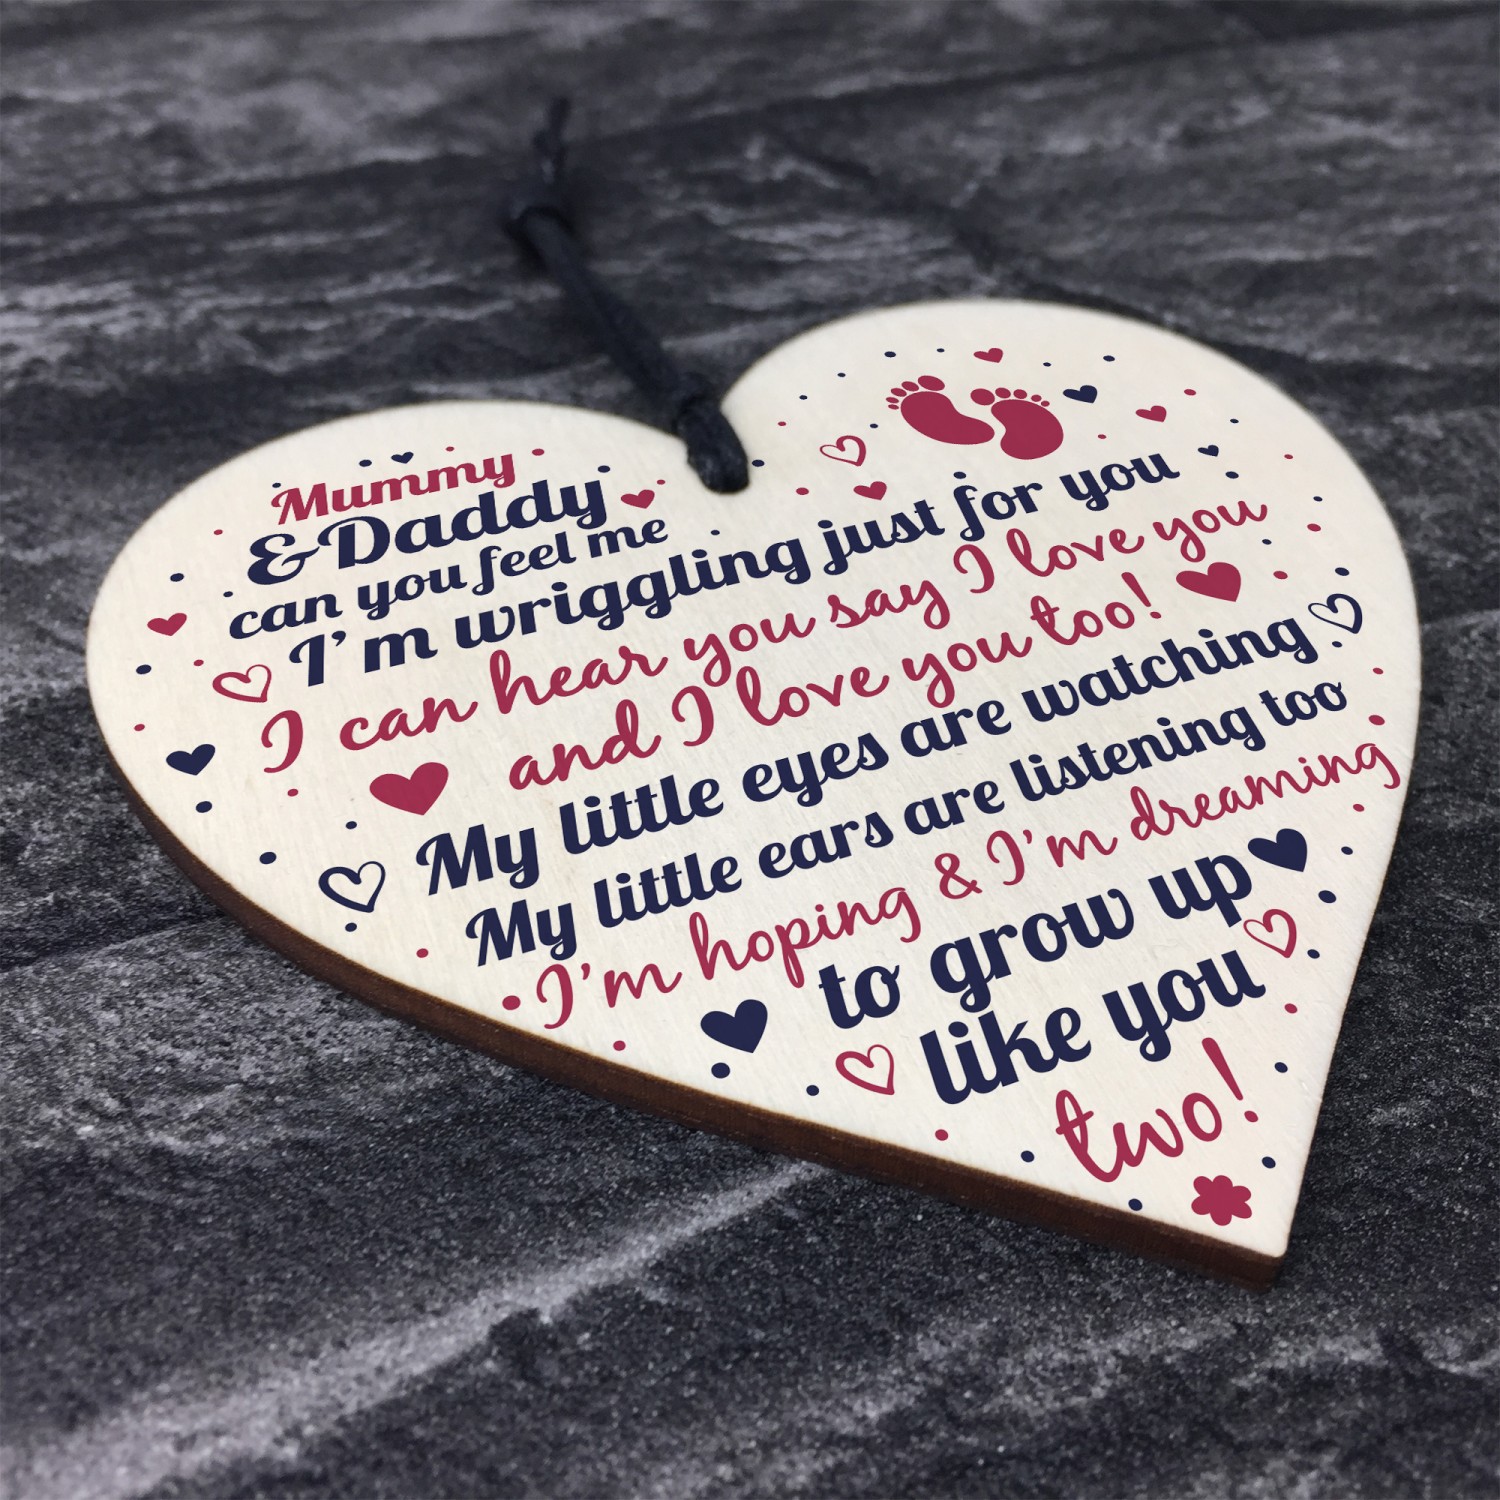 New Mum And Dad Gifts Wooden Heart Baby Shower Gifts For Mum